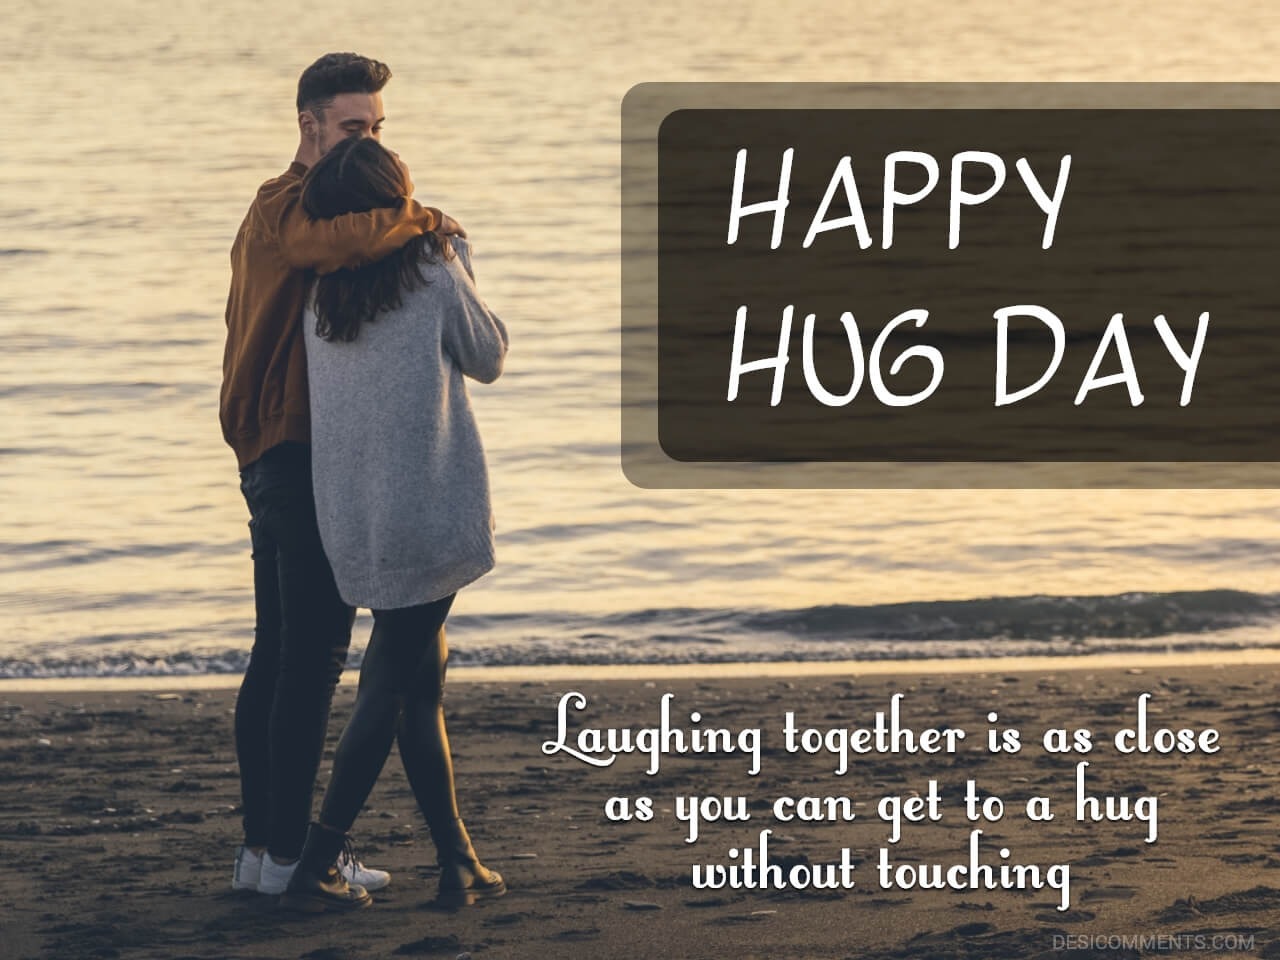 Happy Hug Day Quotes for your love and wallpaper stories for mobiles